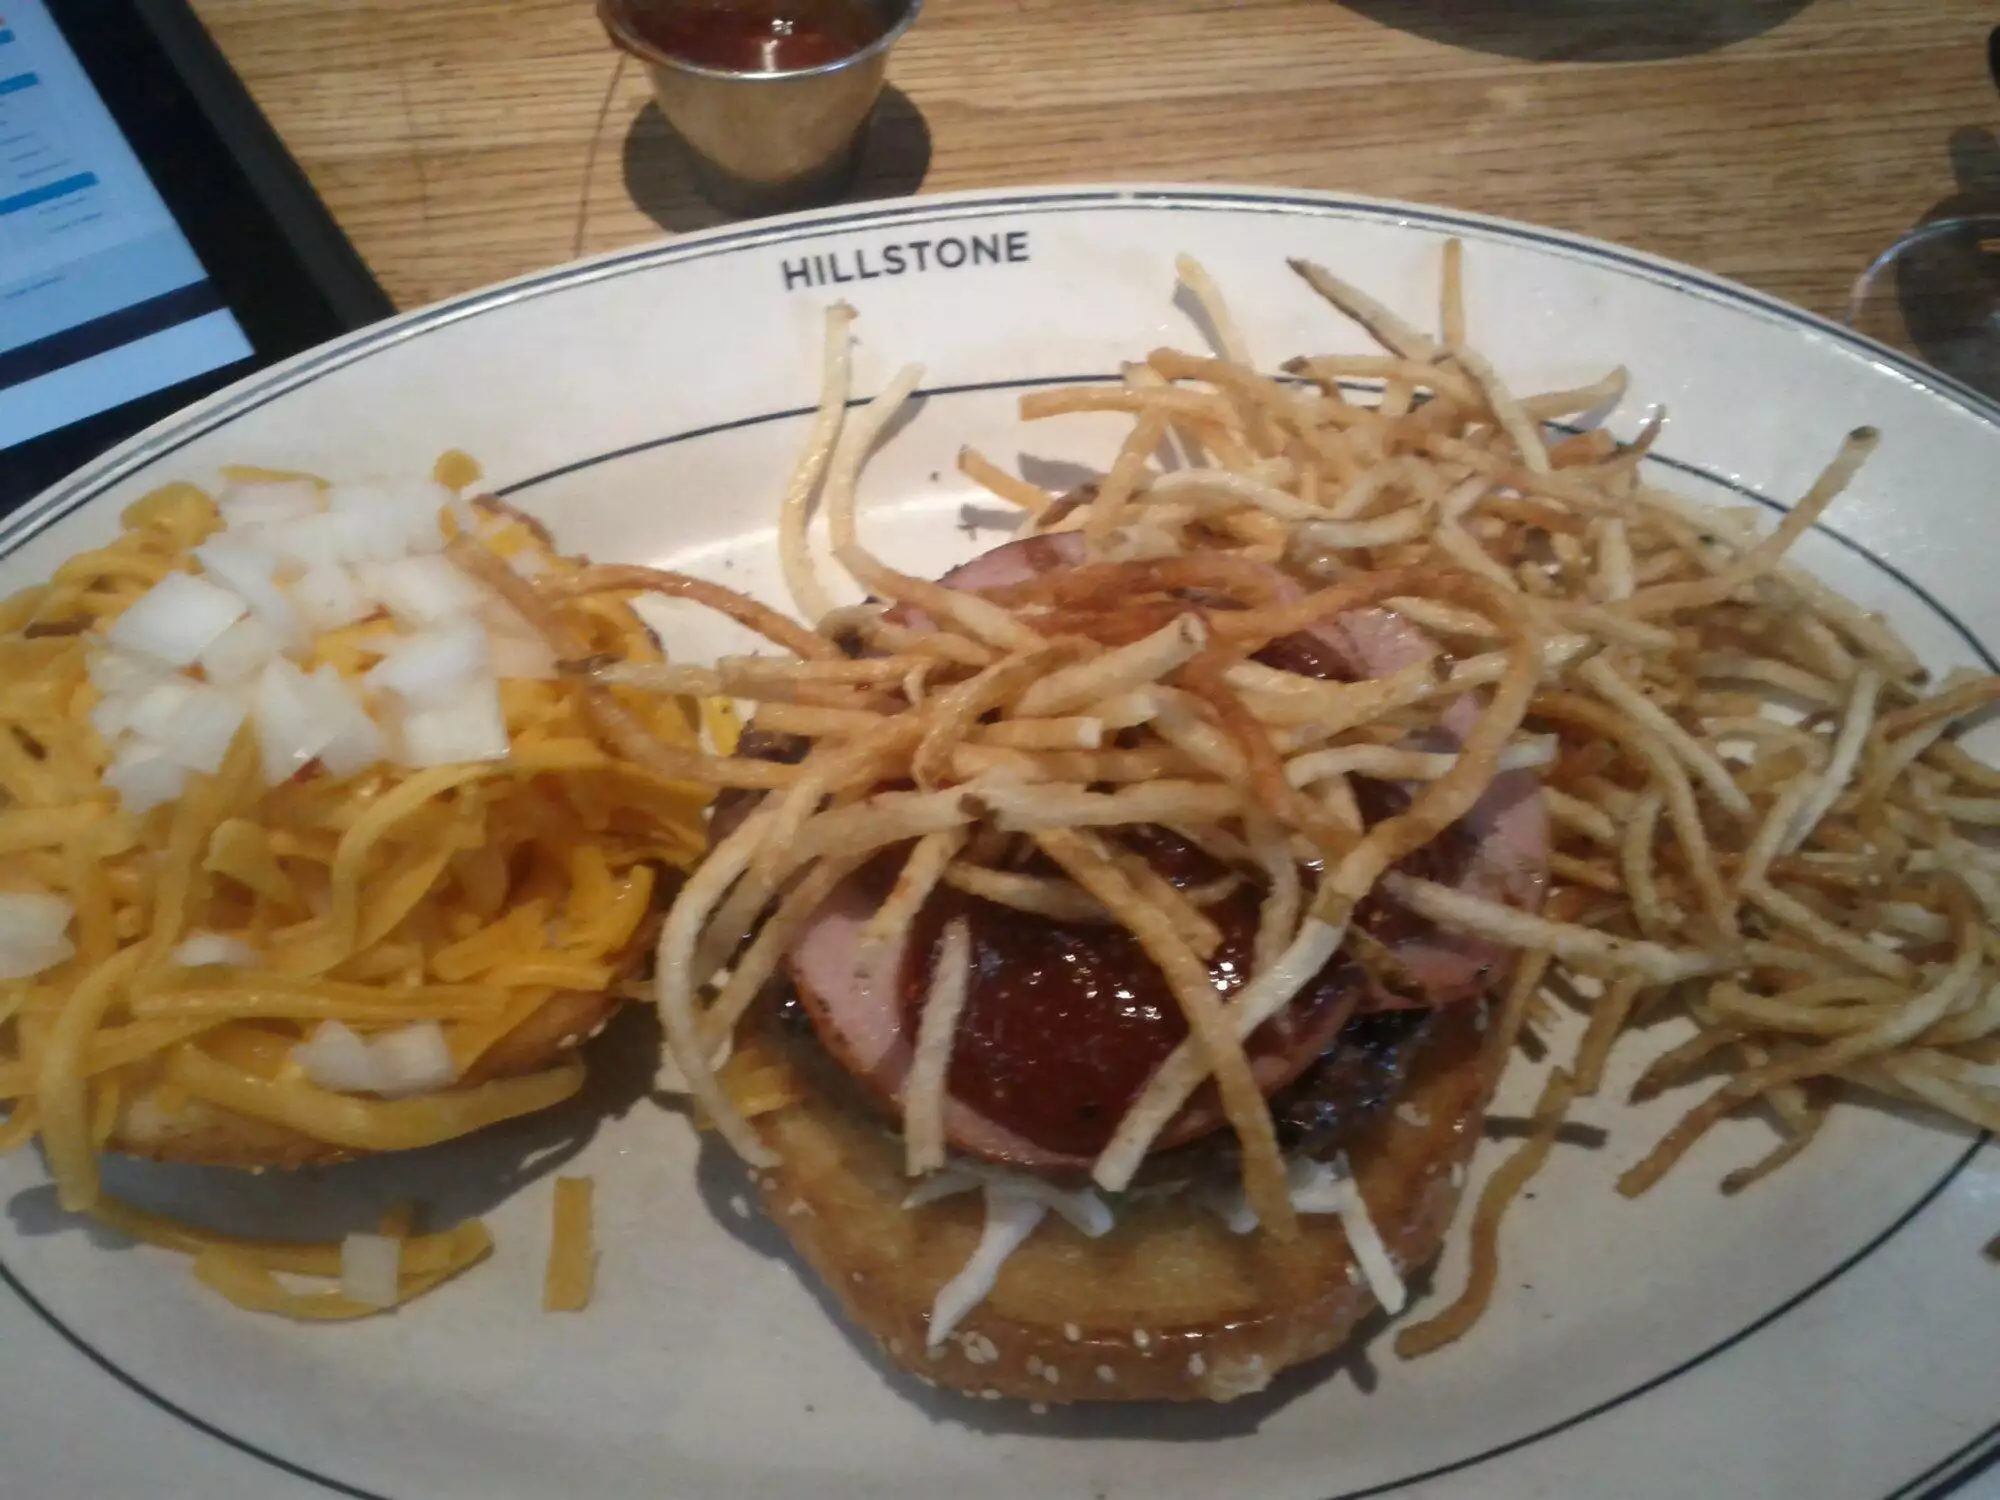 burger at Hillstone in Coral Gables